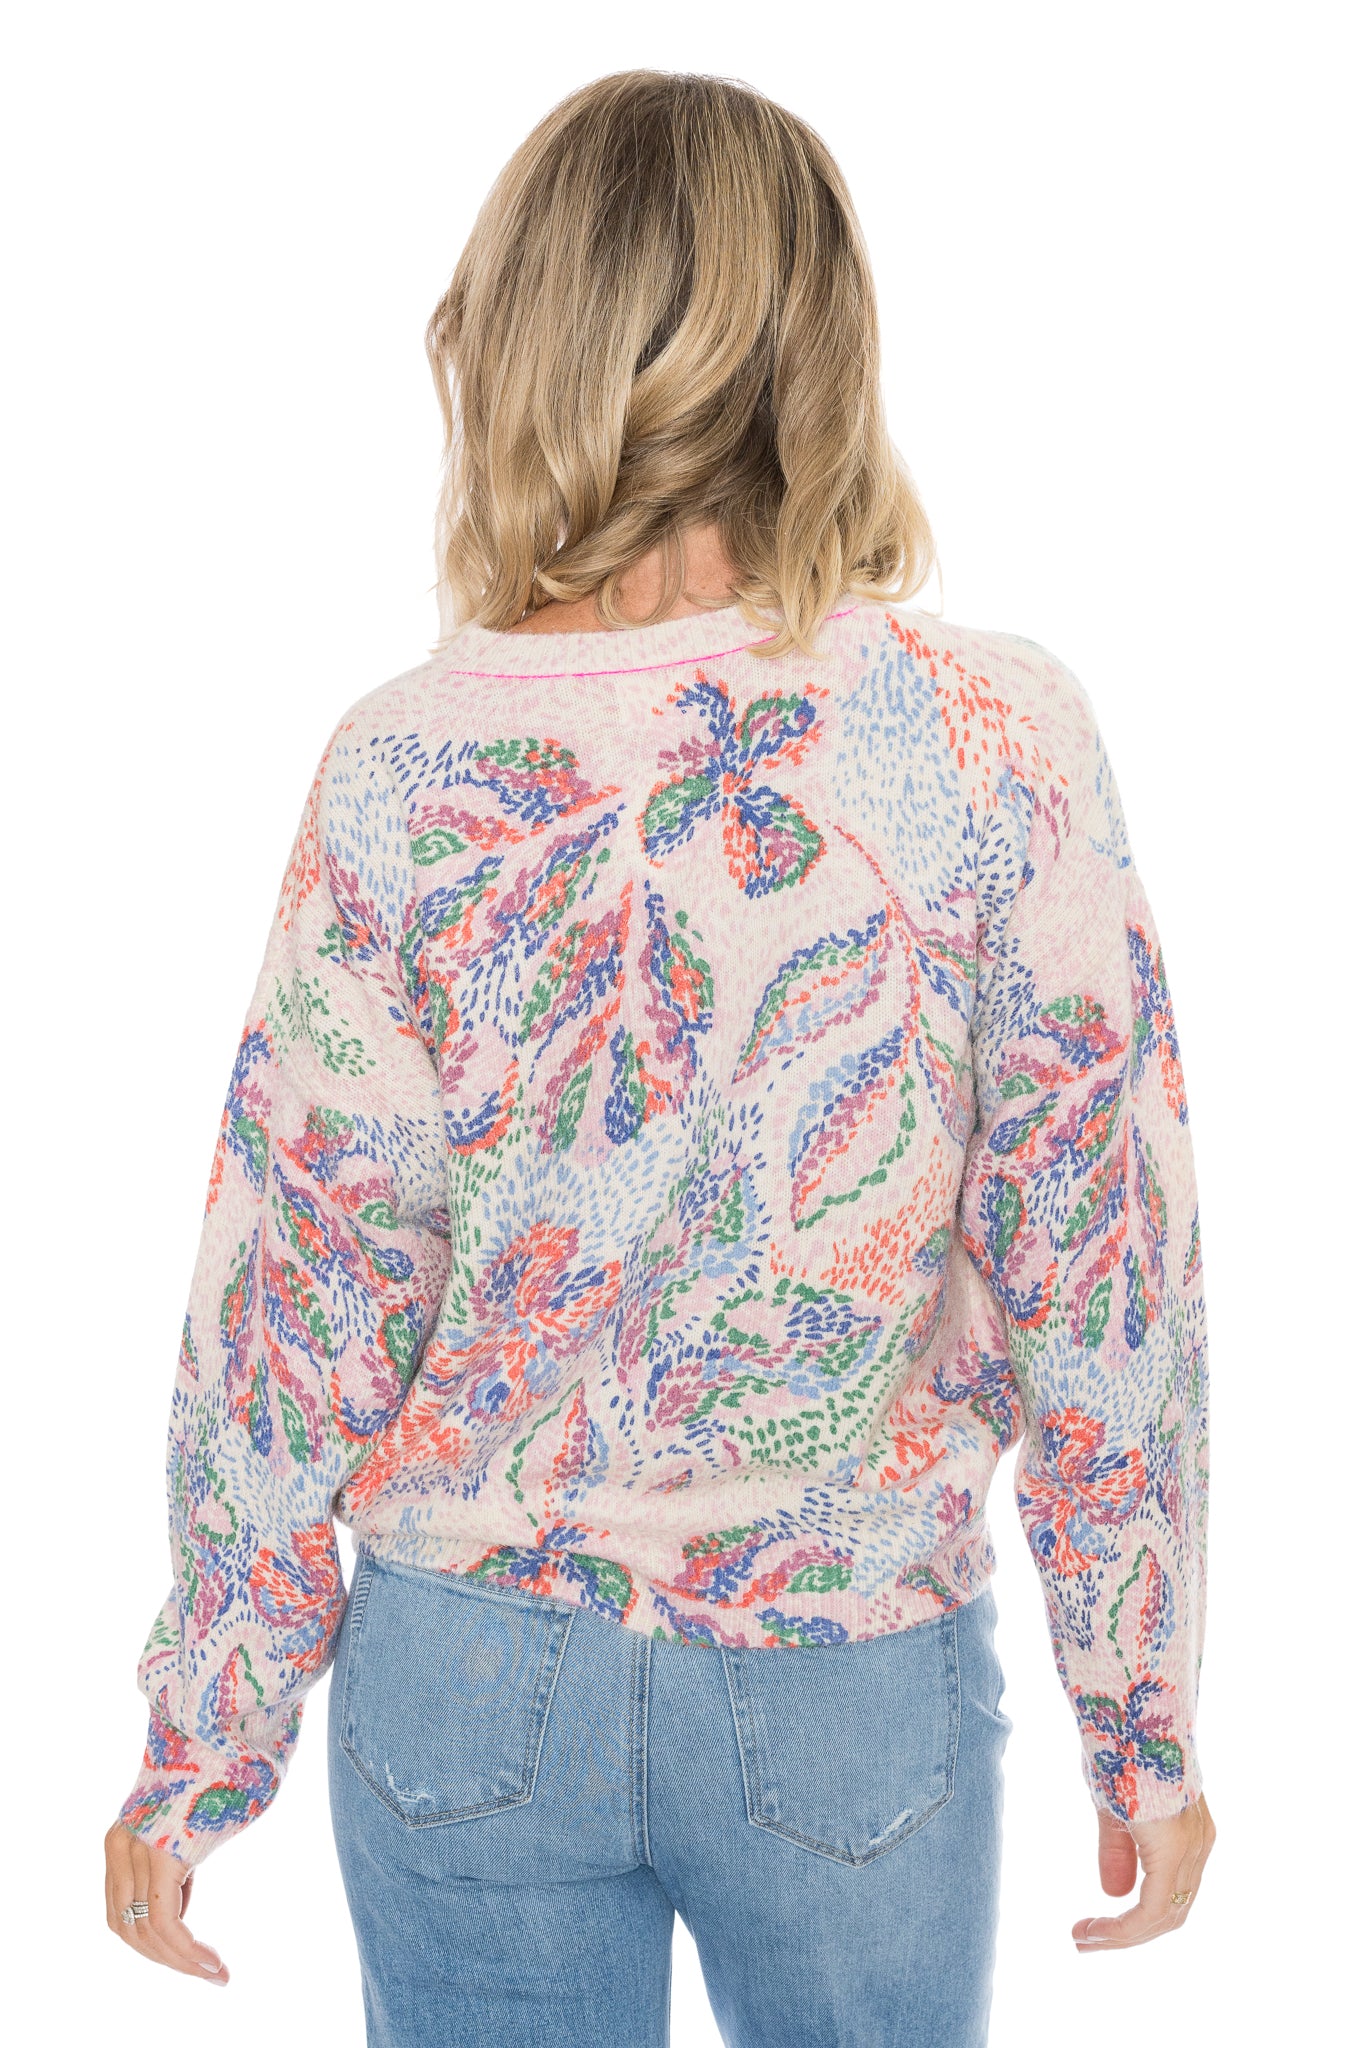 Floral Oversized Sweater by Sundry